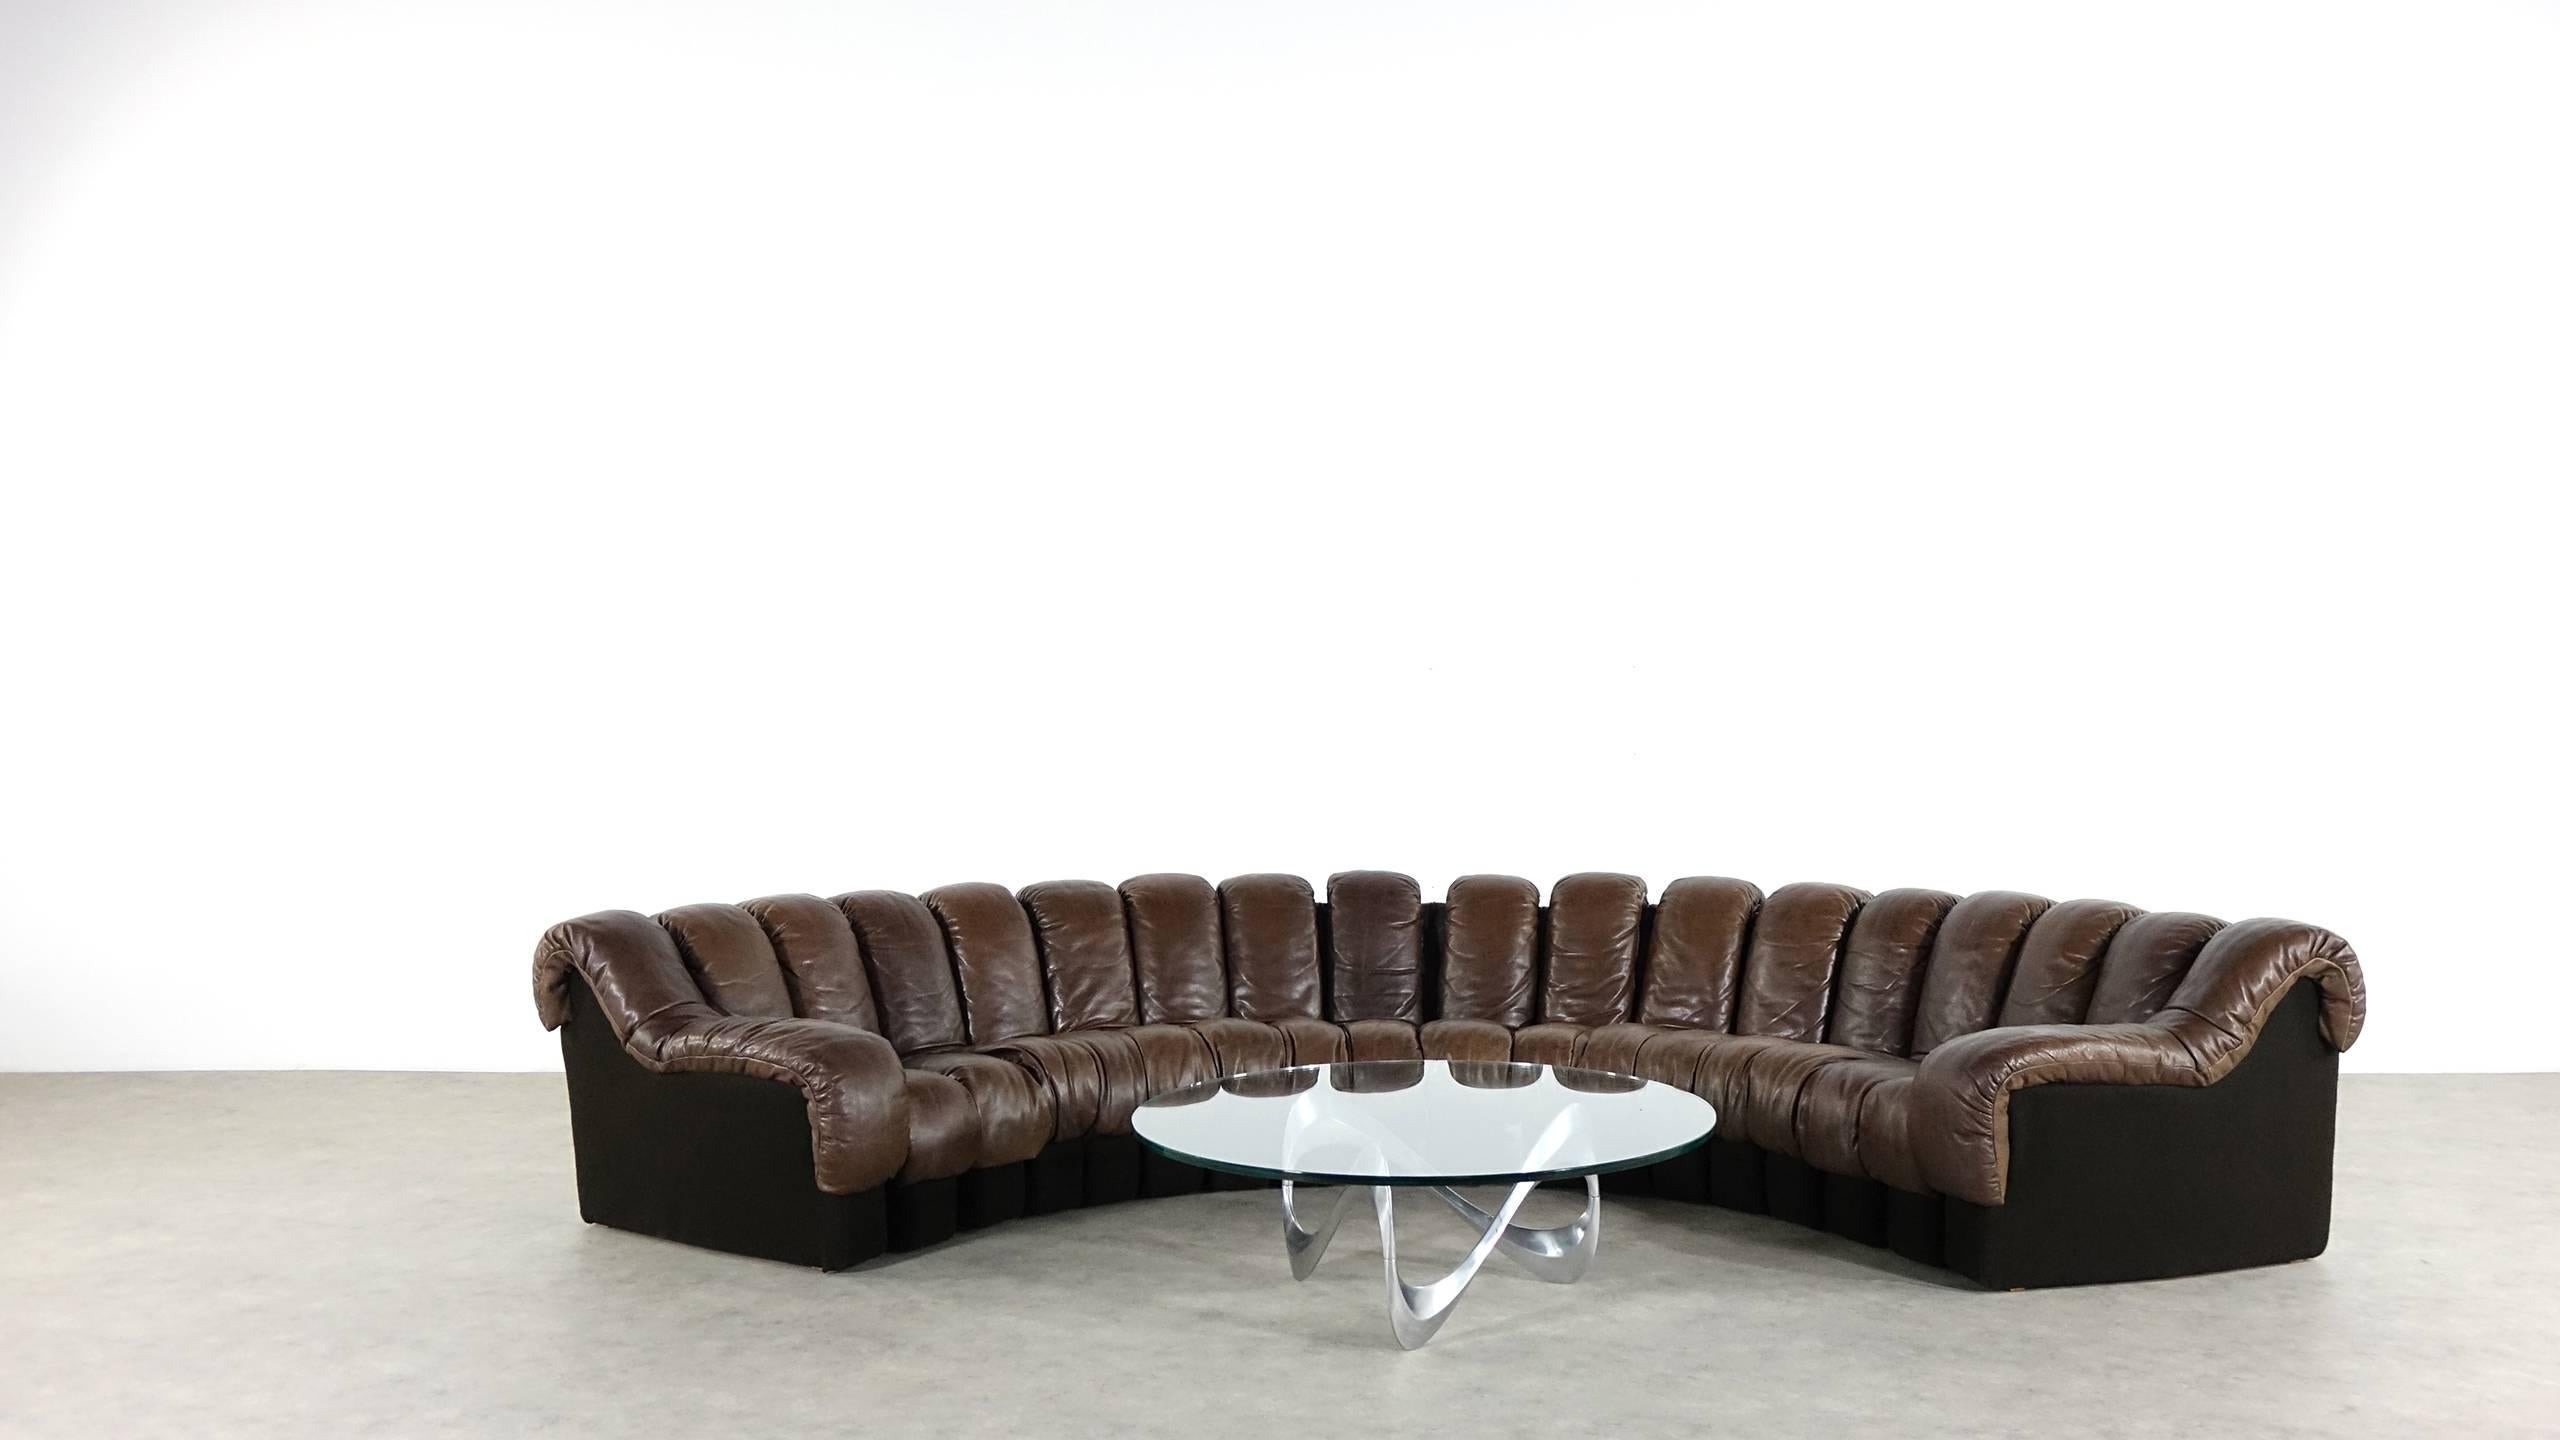 Swiss De Sede Ds 600 Sofa by Ueli Berger and Riva 1972, Chocolate Leather 18 Elements